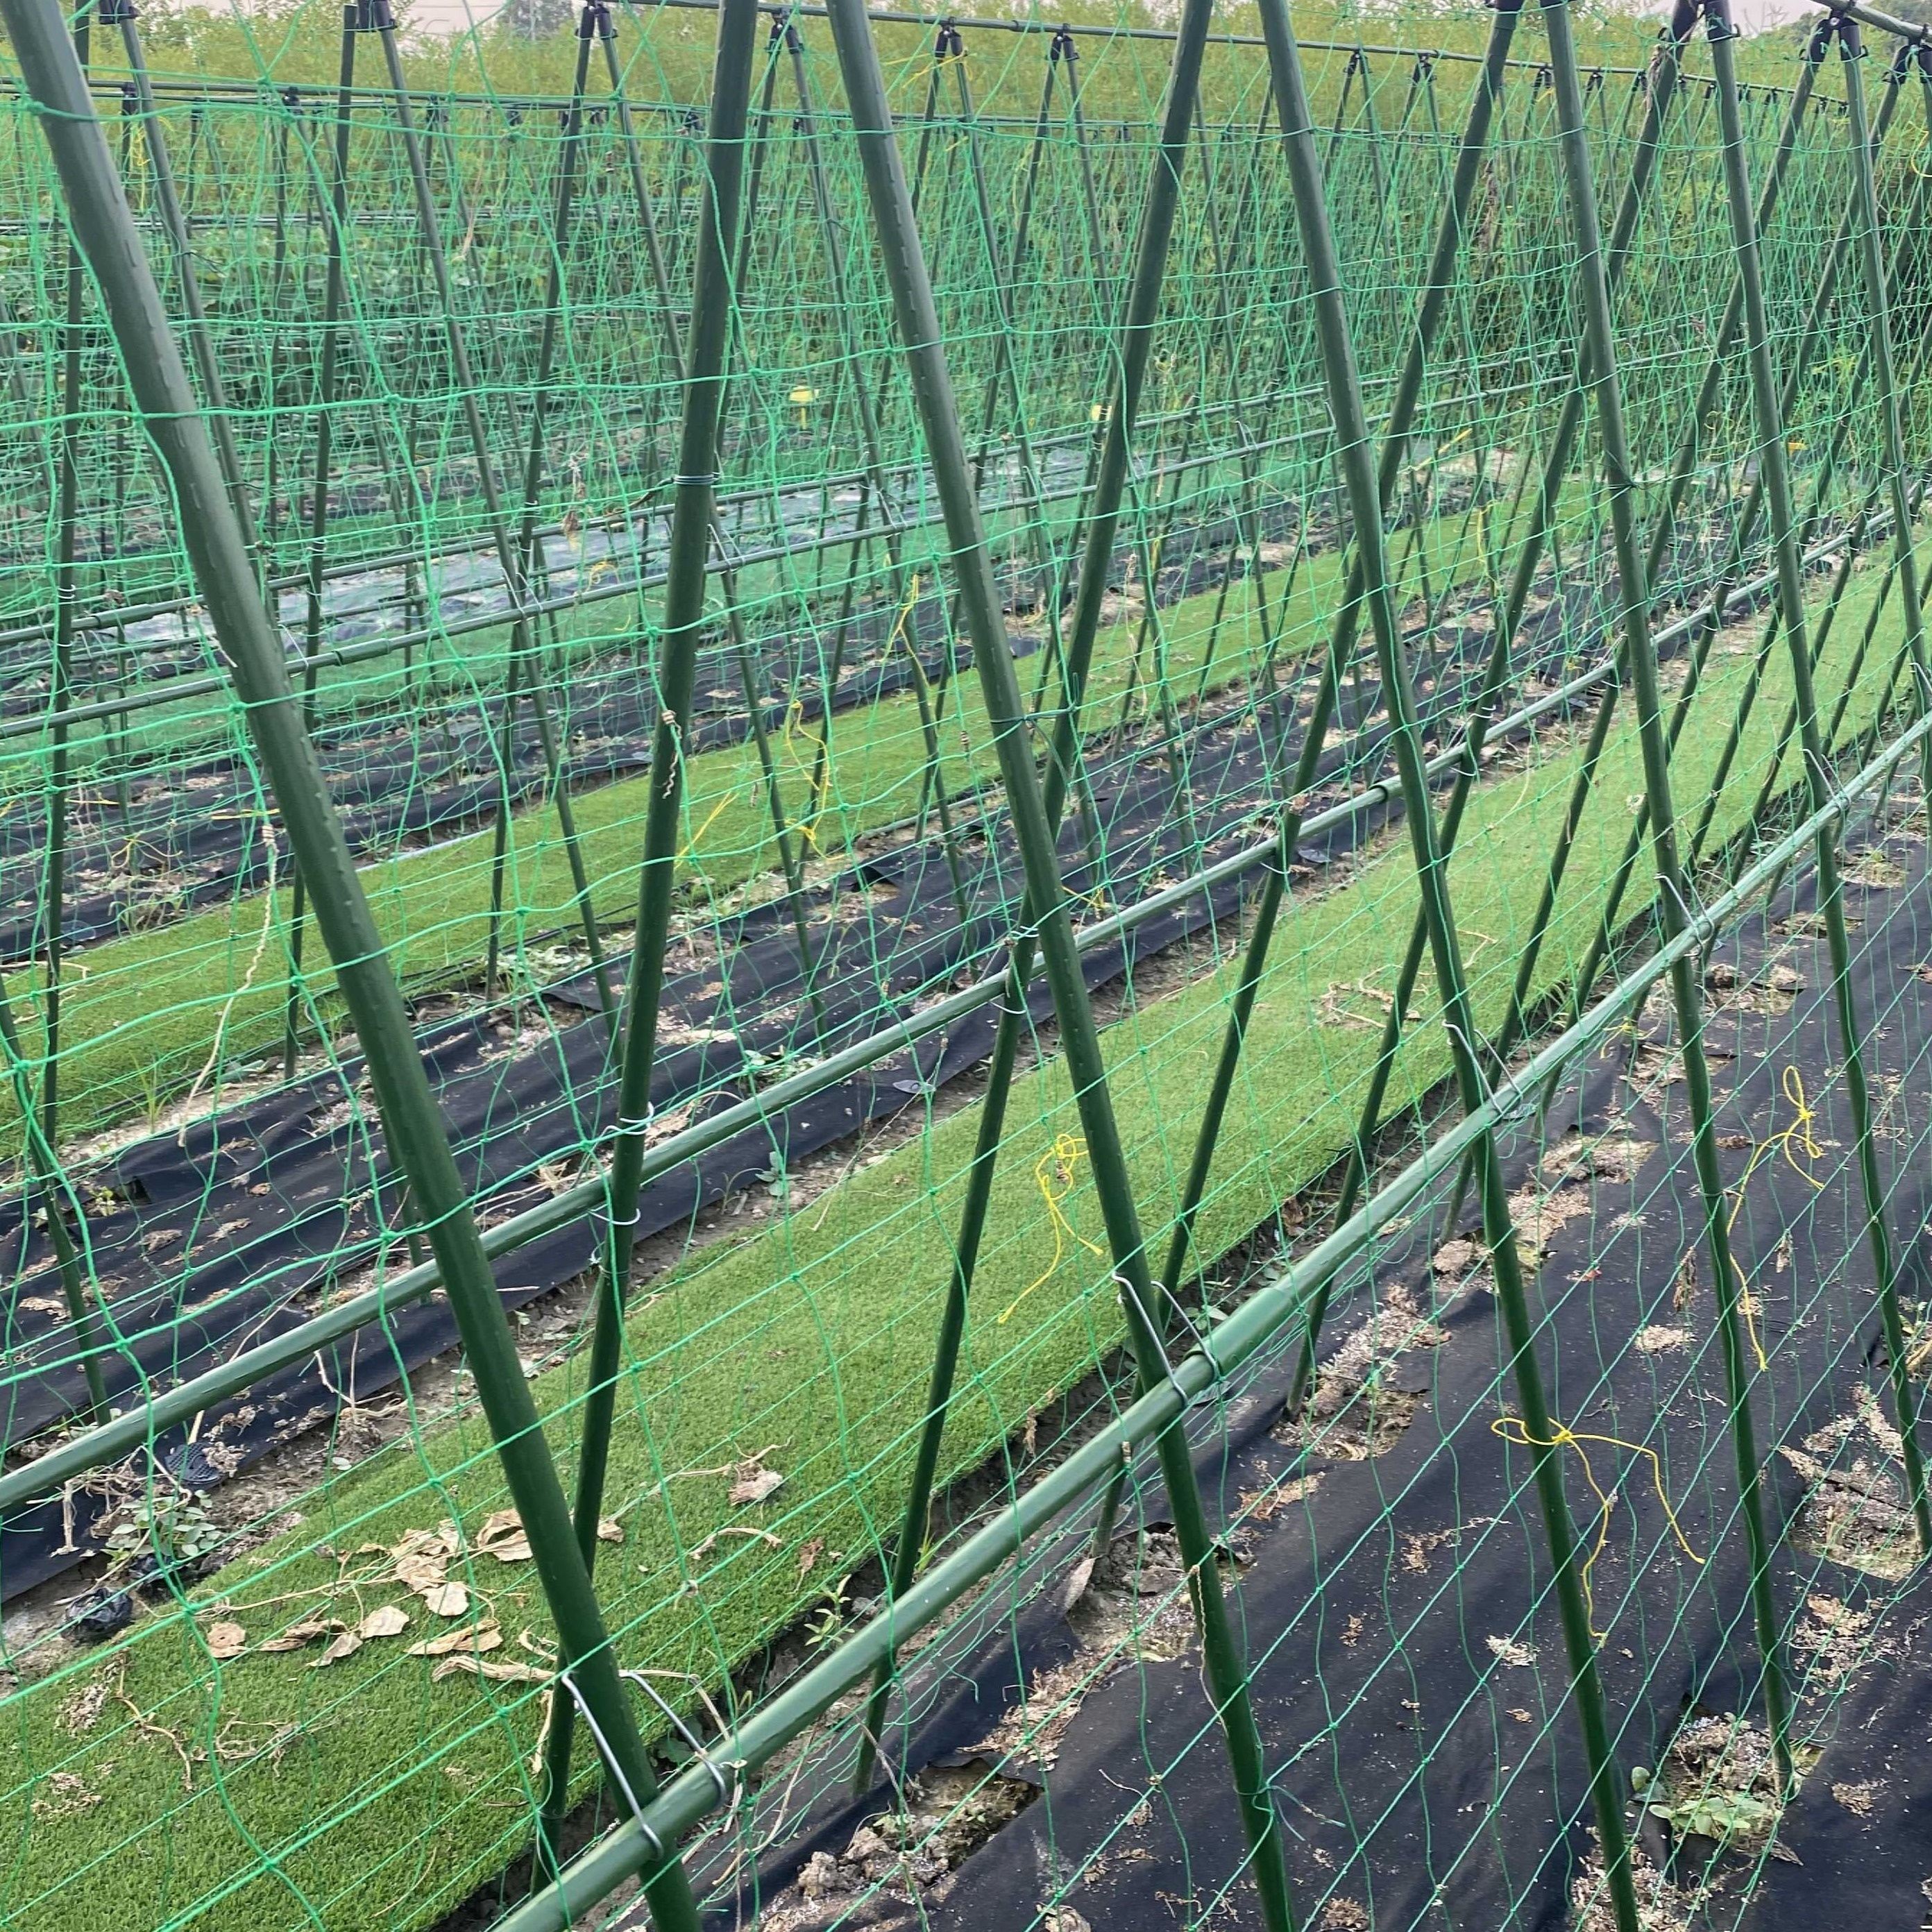 

Sturdy Garden Trellis Netting For Vine Support - Perfect For Climbing Vegetables, Clematis, Cucumbers & Tomatoes, Non-waterproof Outdoor Furniture